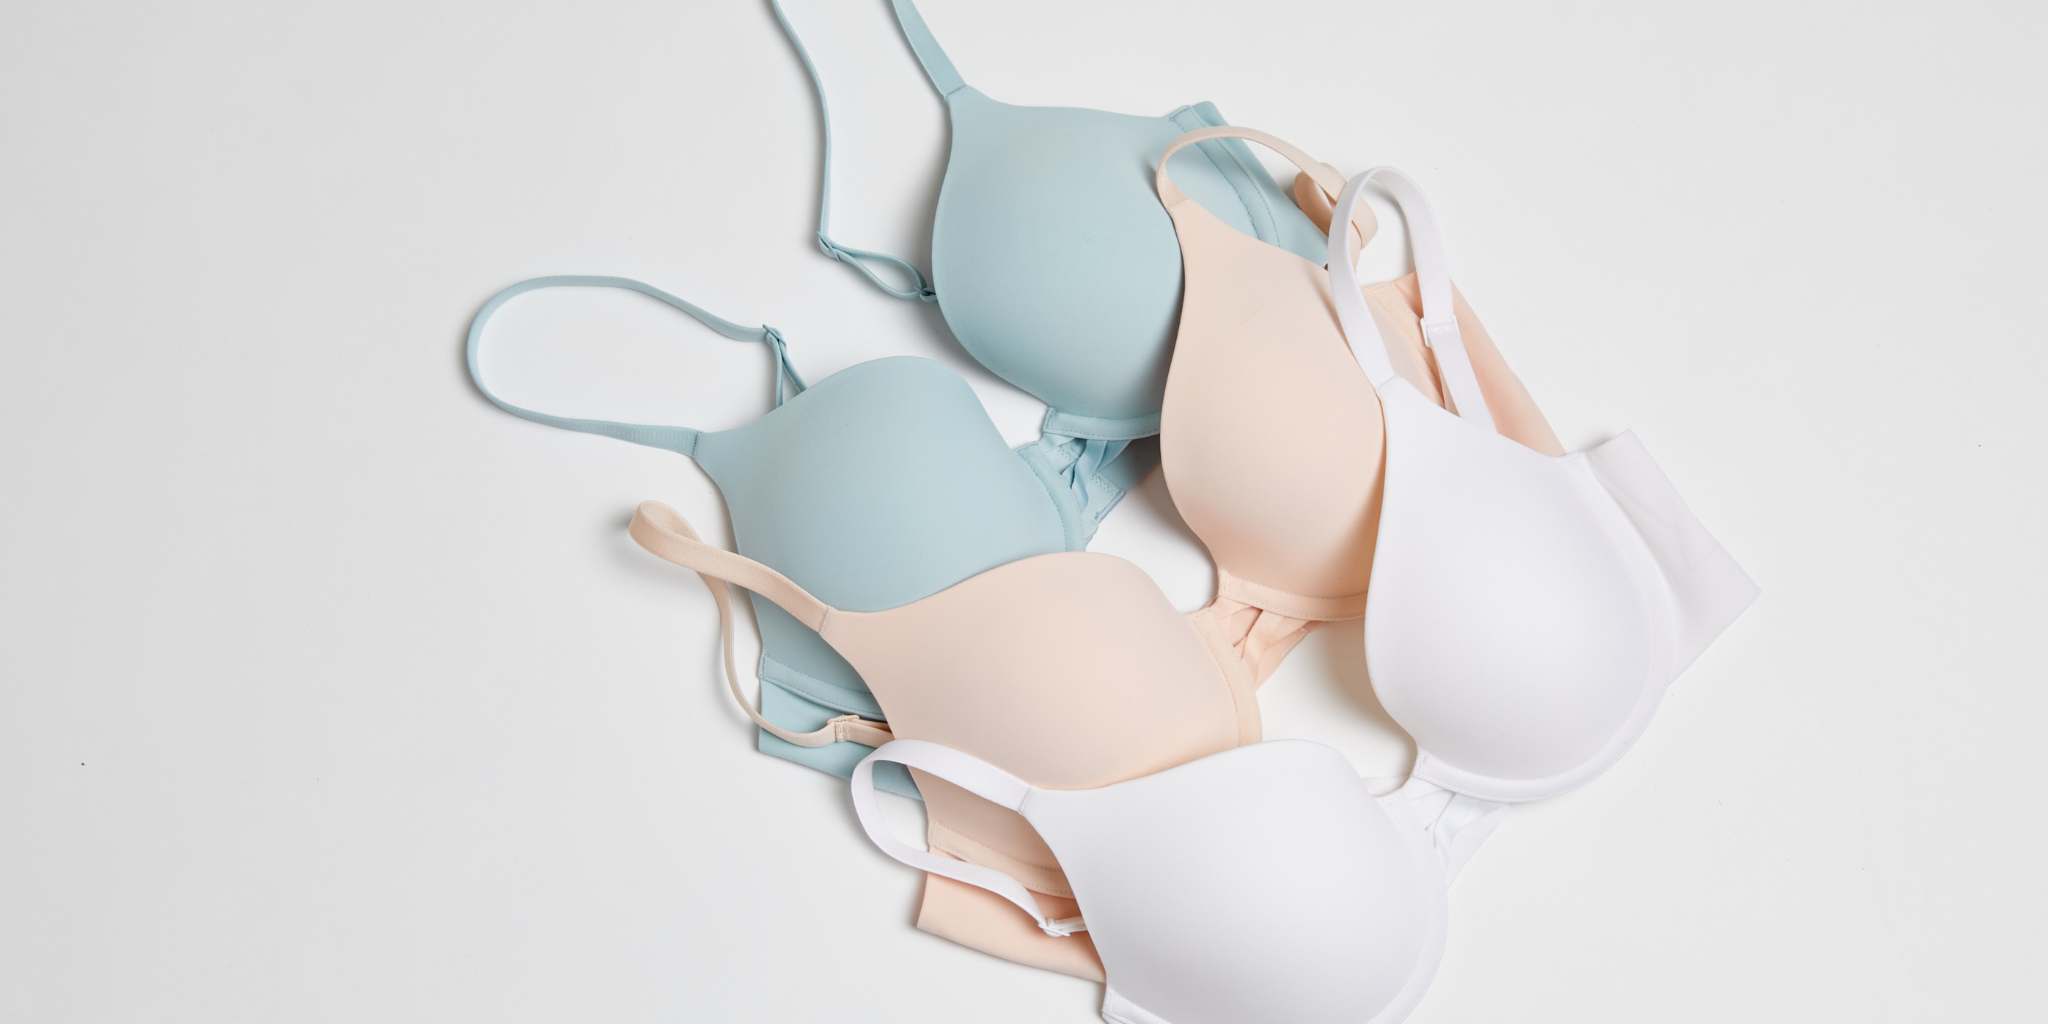 See How To Measure Your Bra Size